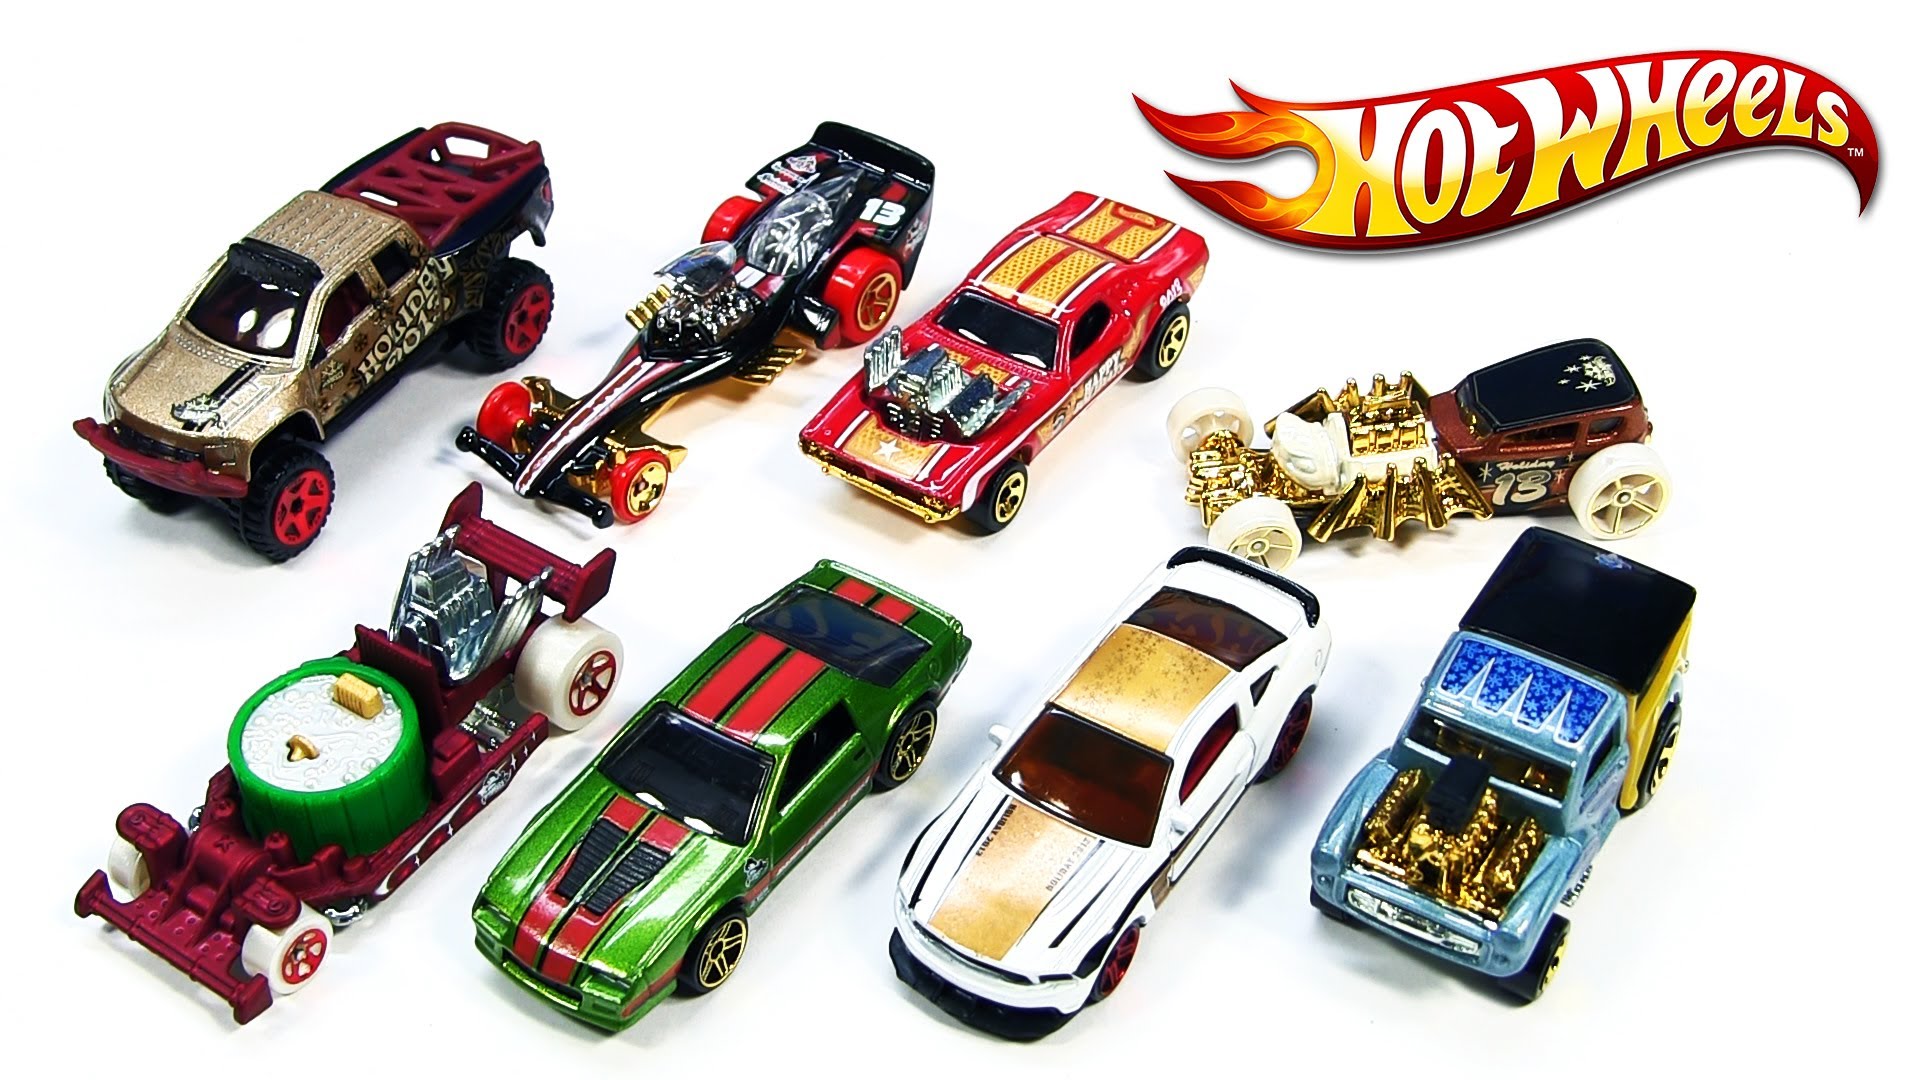 Hot Wheel Toys on Sale - Up to 40% Off!